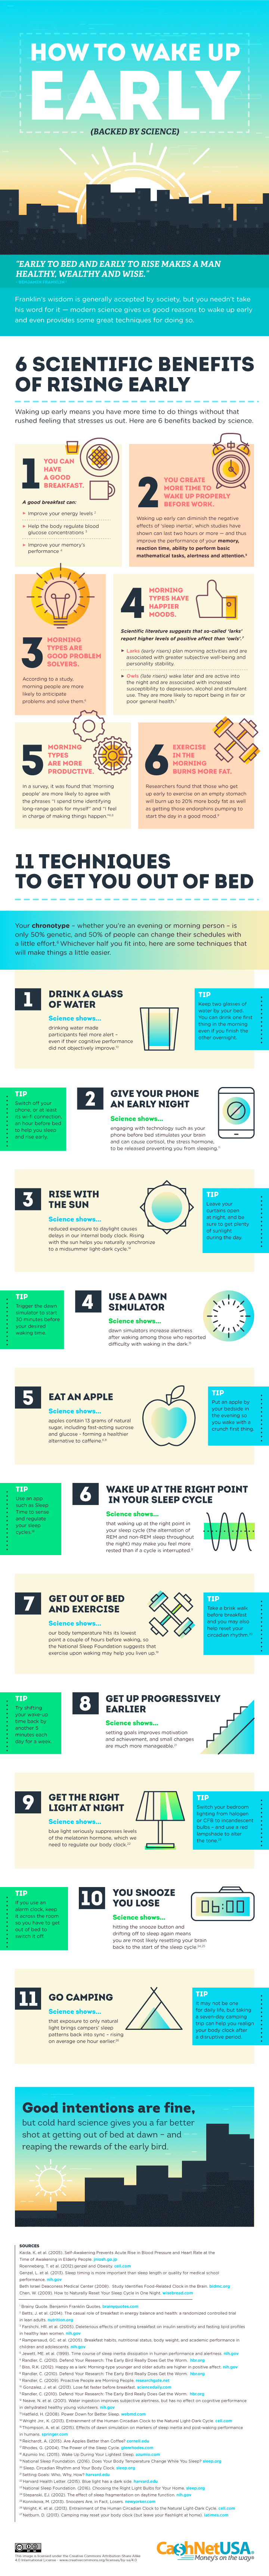 How to Wake Up Early - #infographic